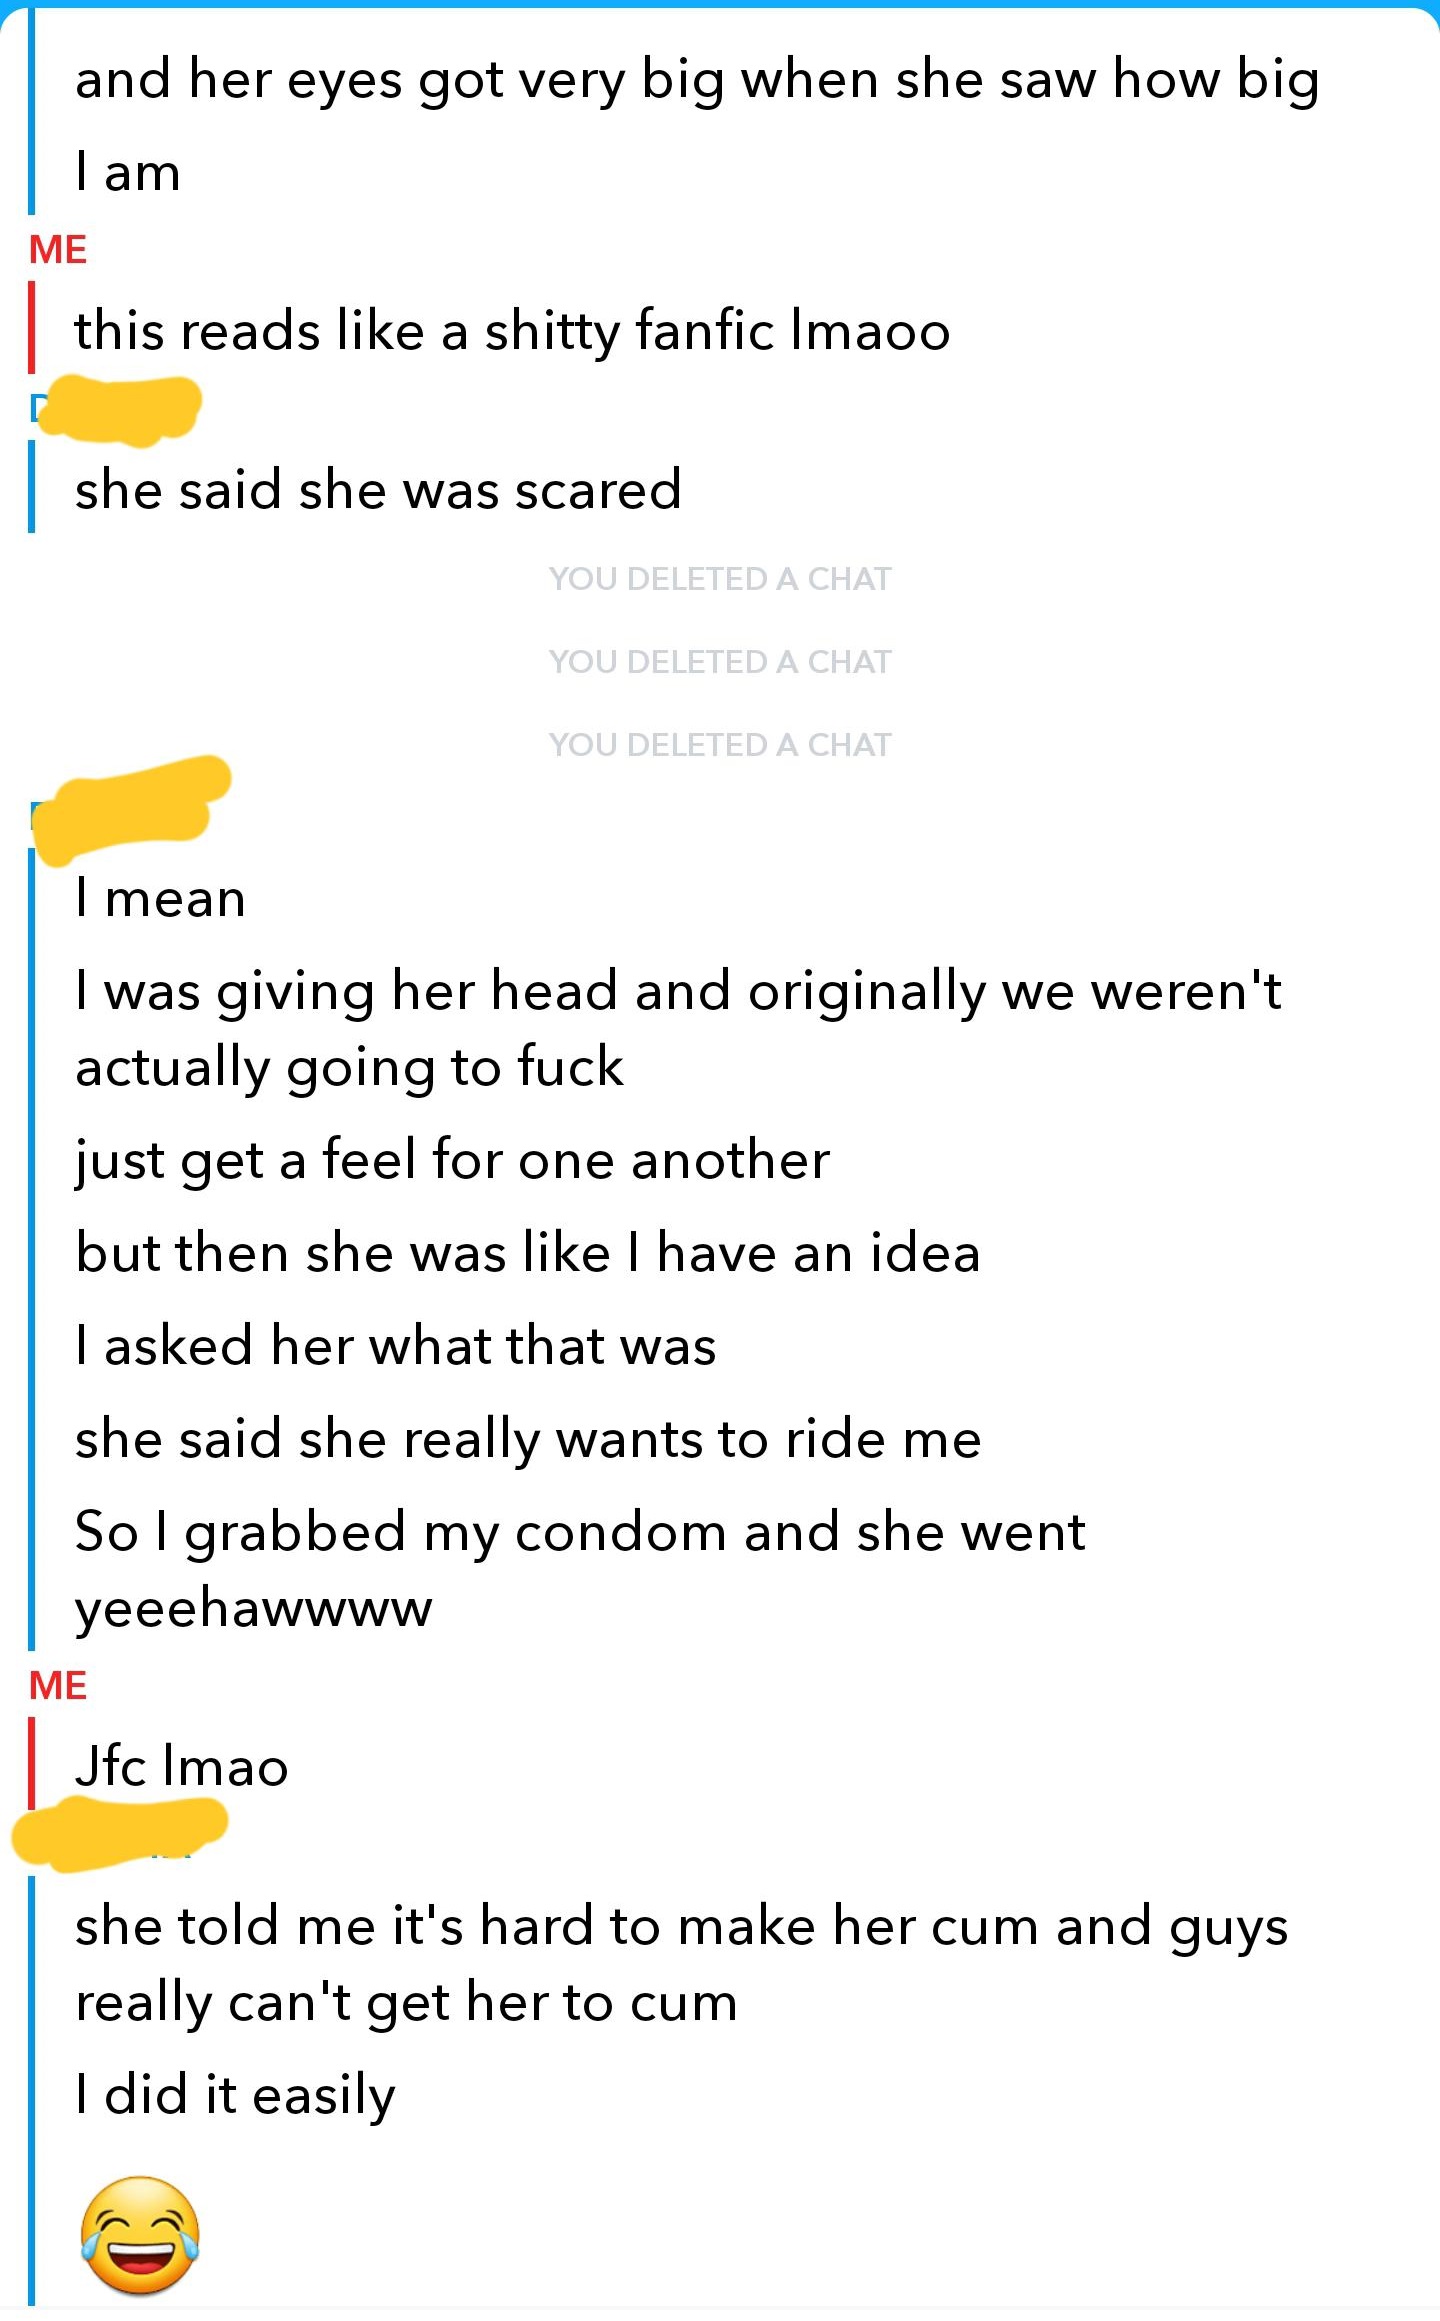 and her eyes got very big when she saw how big I am Me | this reads a shitty fanfic Imaoo | she said she was scared You Deleted A Chat You Deleted A Chat You Deleted A Chat I mean I was giving her head and originally we weren't actually going to fuck just